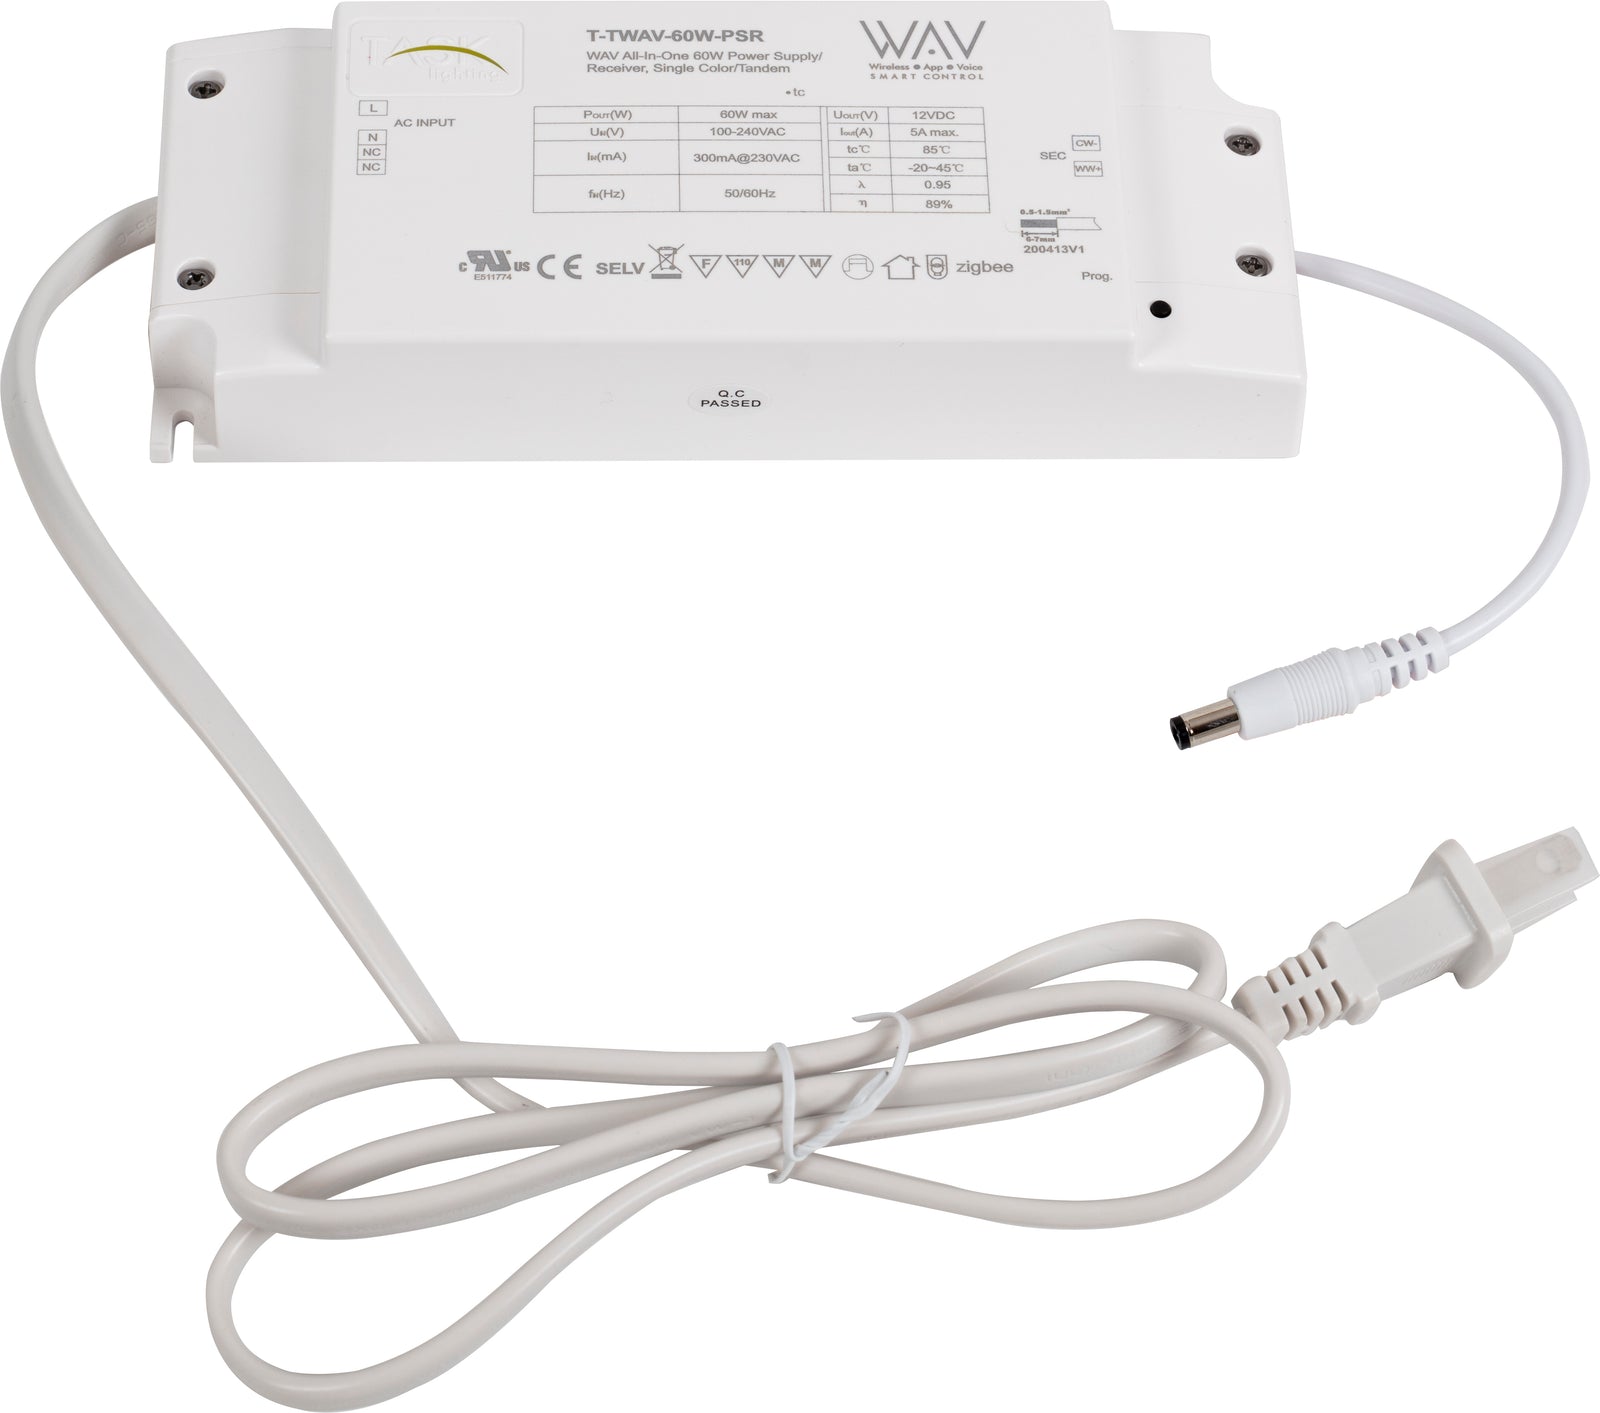 WAV All-In-One 60W Power Sup/Receiver, Single Color/Tandem